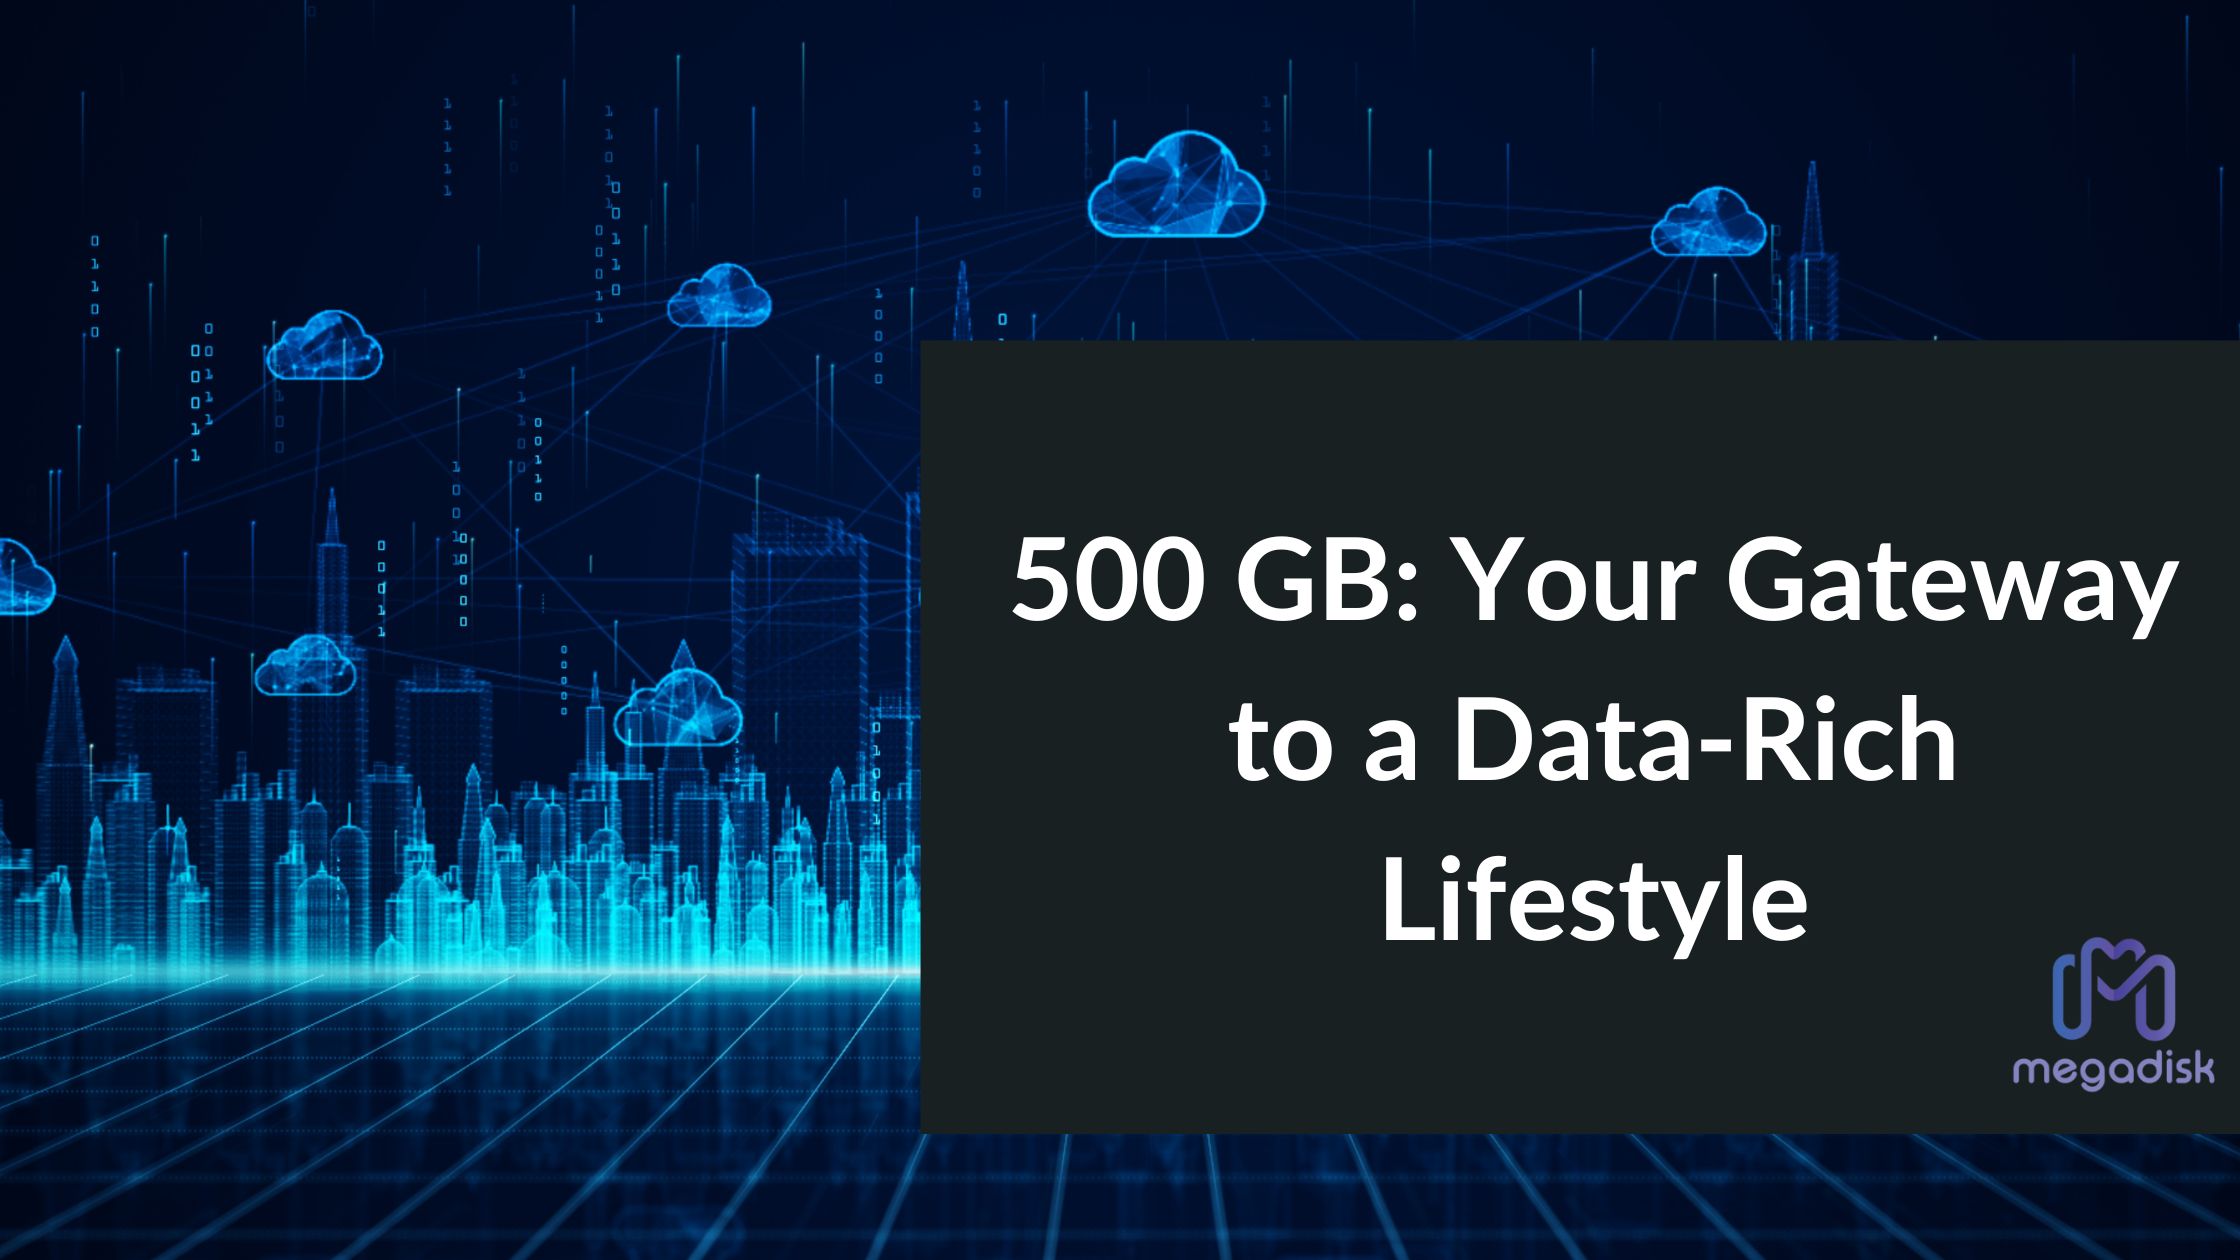 500 GB: Your Gateway to a Data-Rich Lifestyle